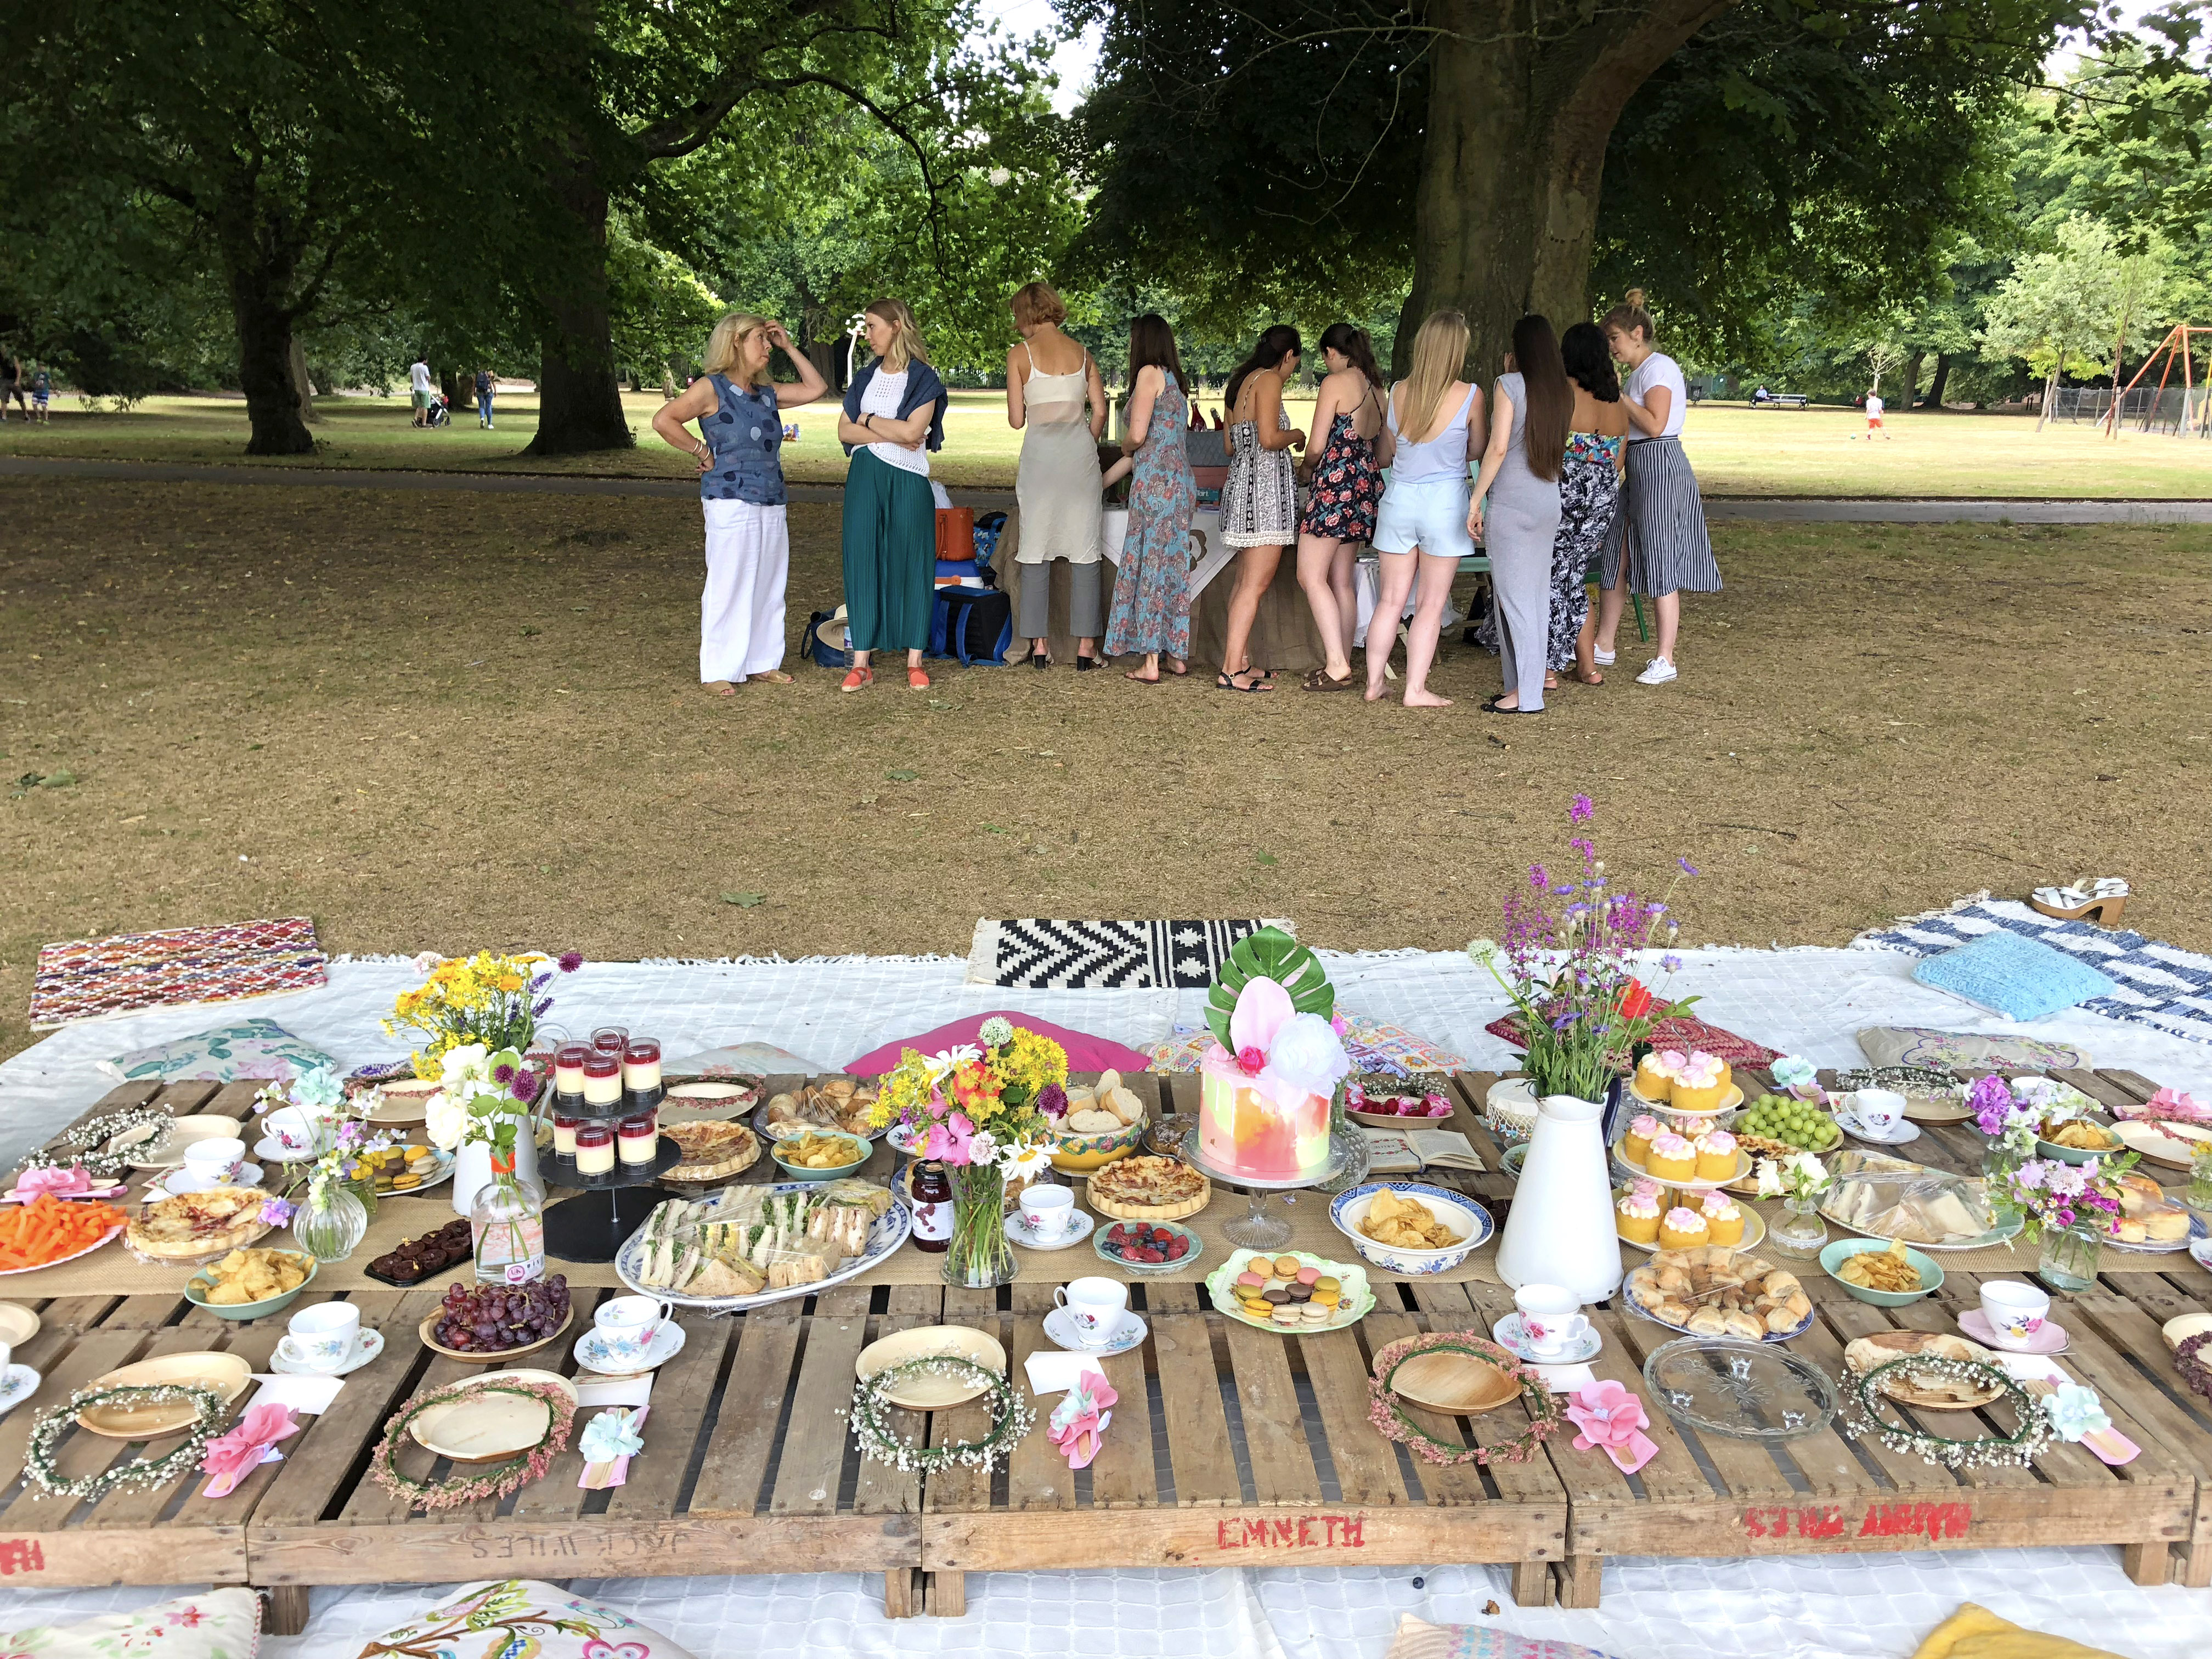 Cheap hen do picnic in the park with flowers and bohemian decorations